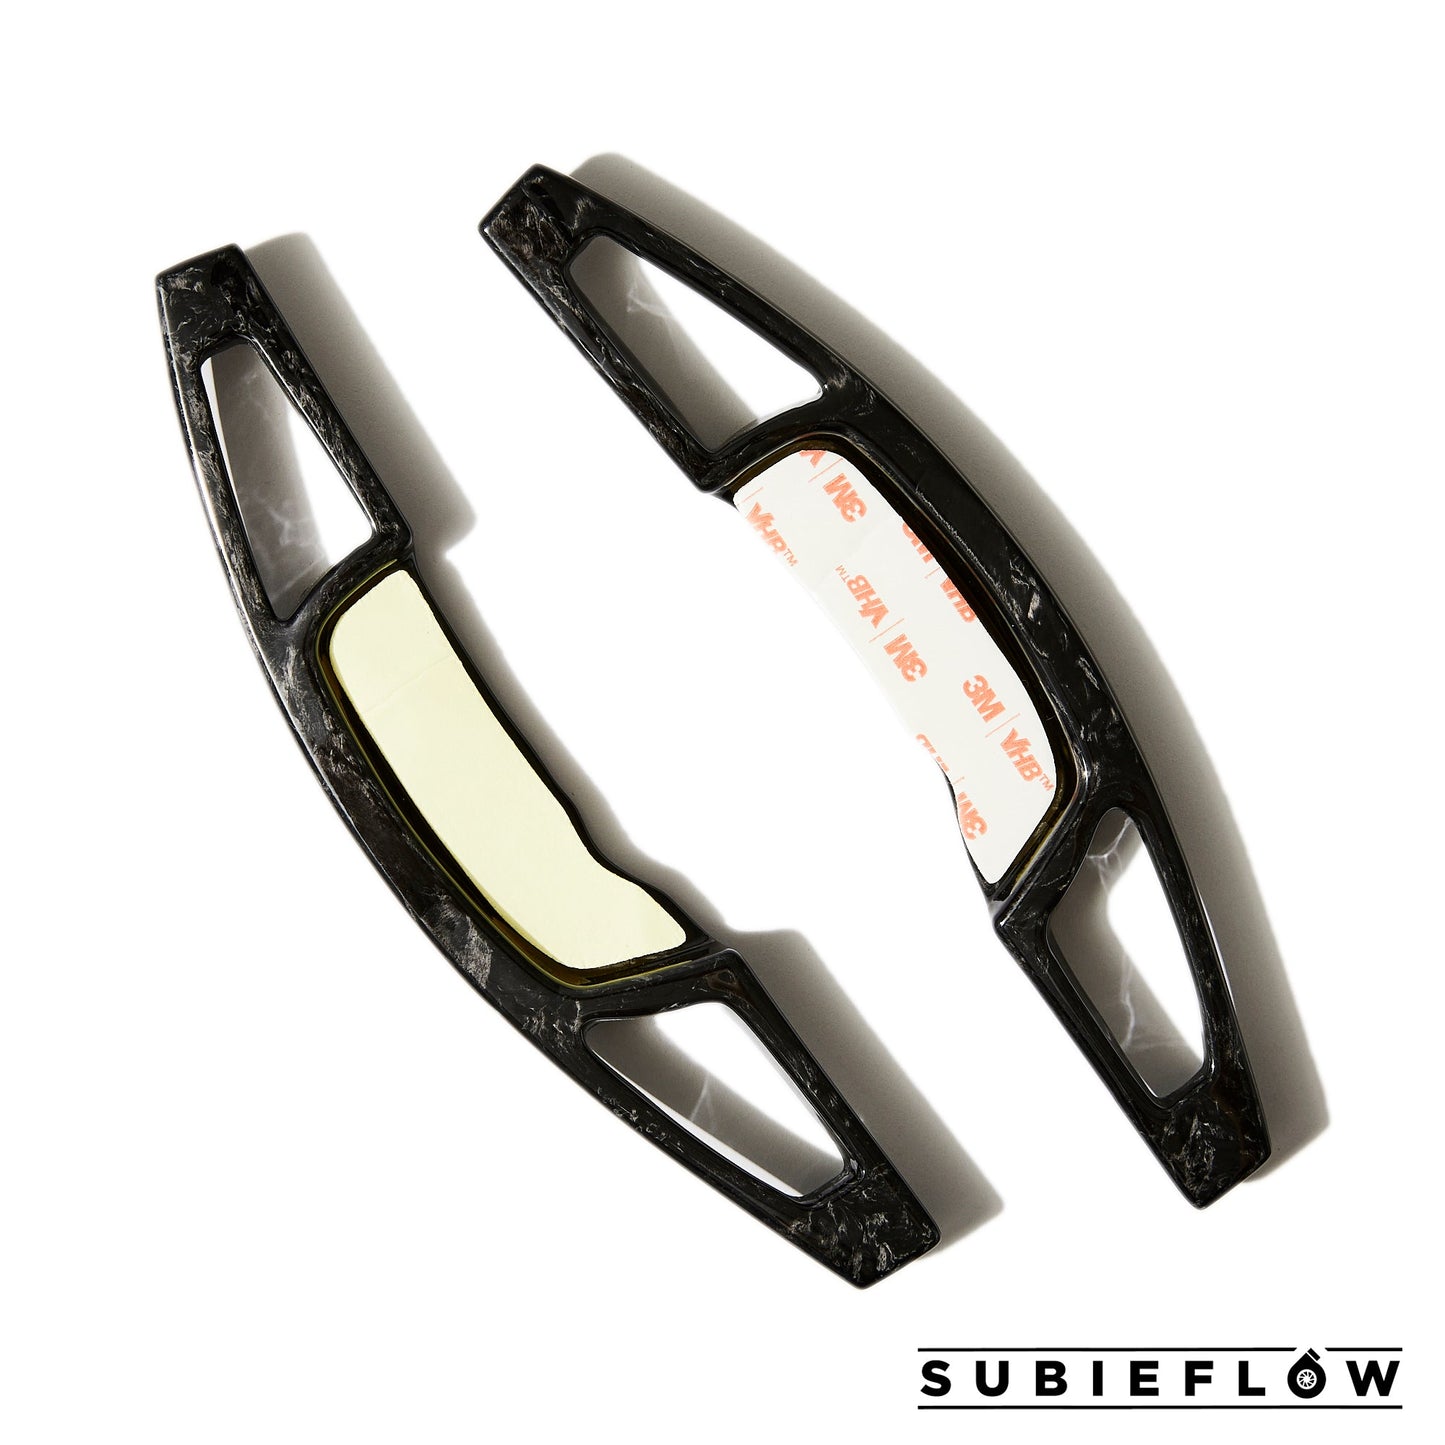 Forged Carbon Paddle Shifters - SubieFlow